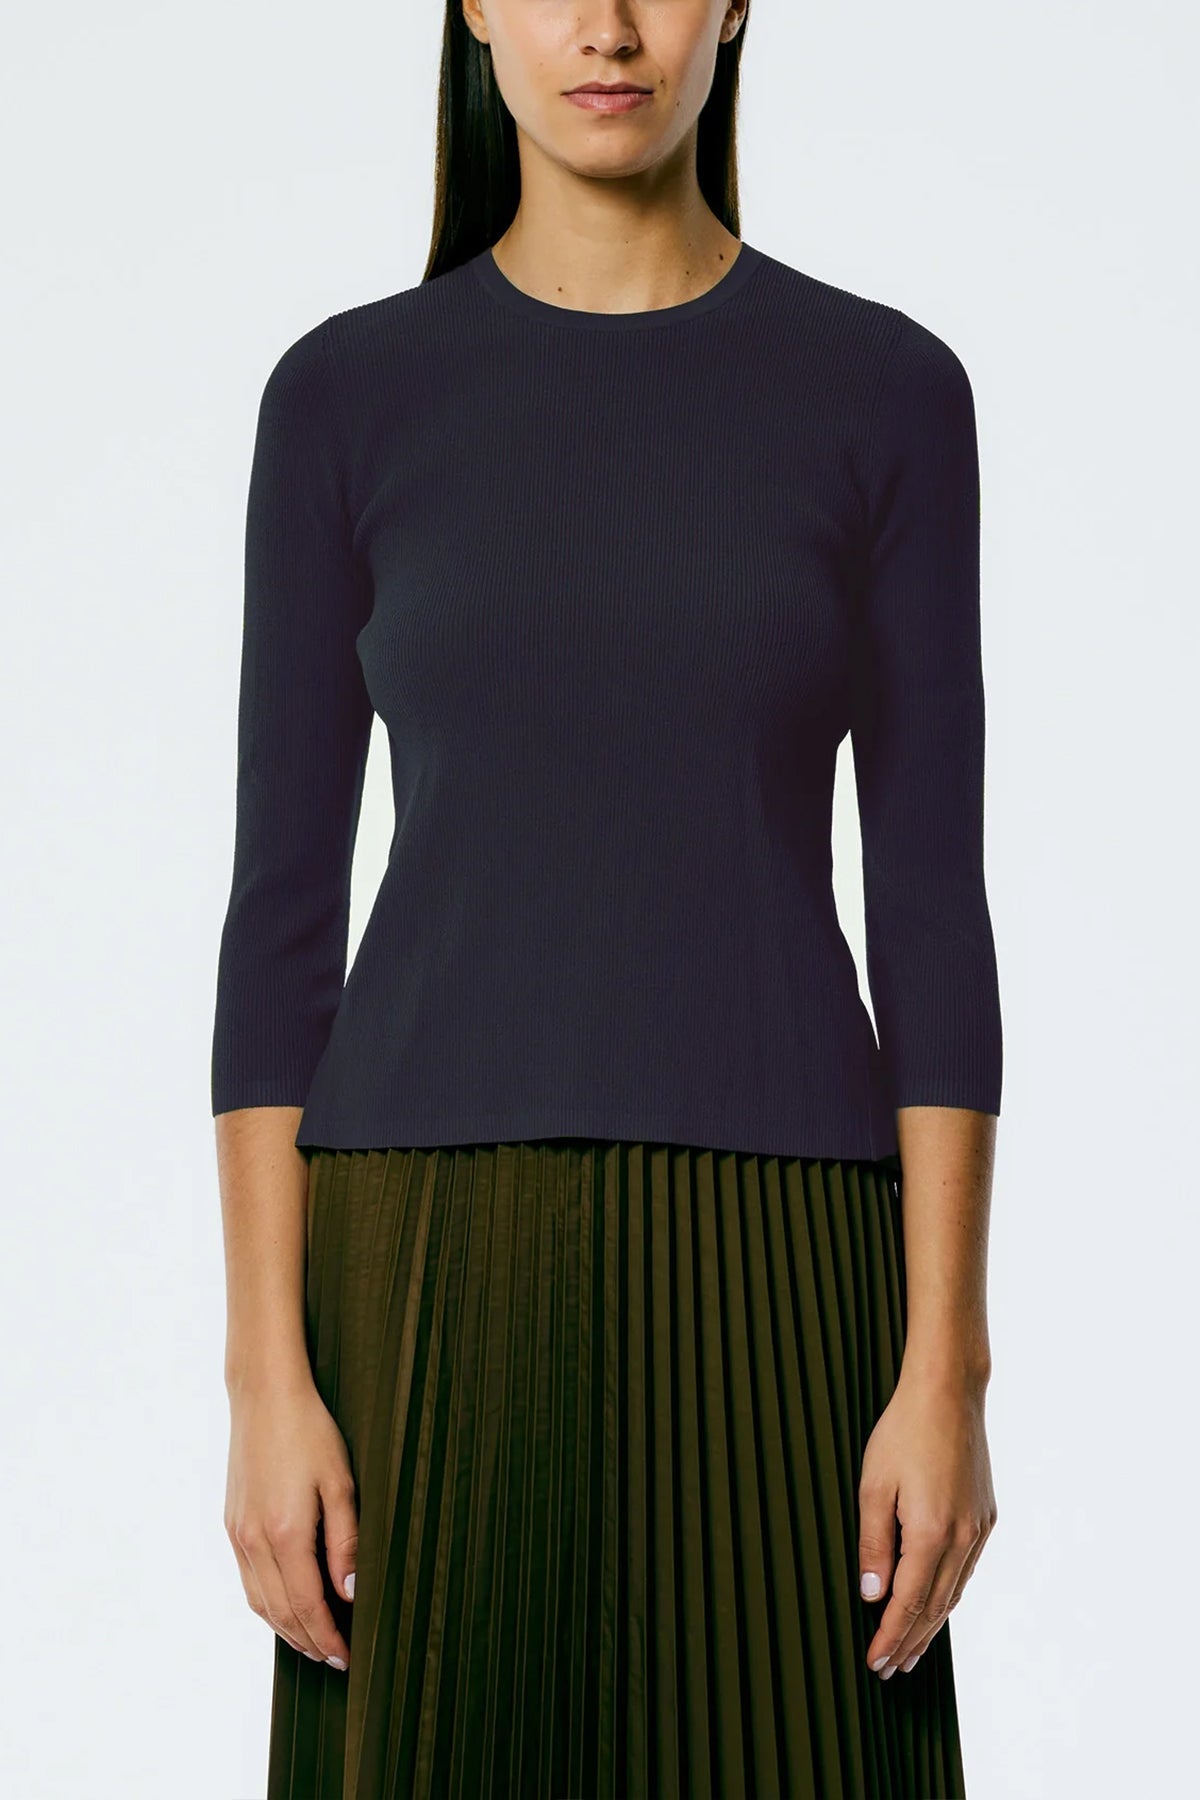 Giselle Stretch Sweater Circle Openback Pullover in Navy Fog - shop-olivia.com